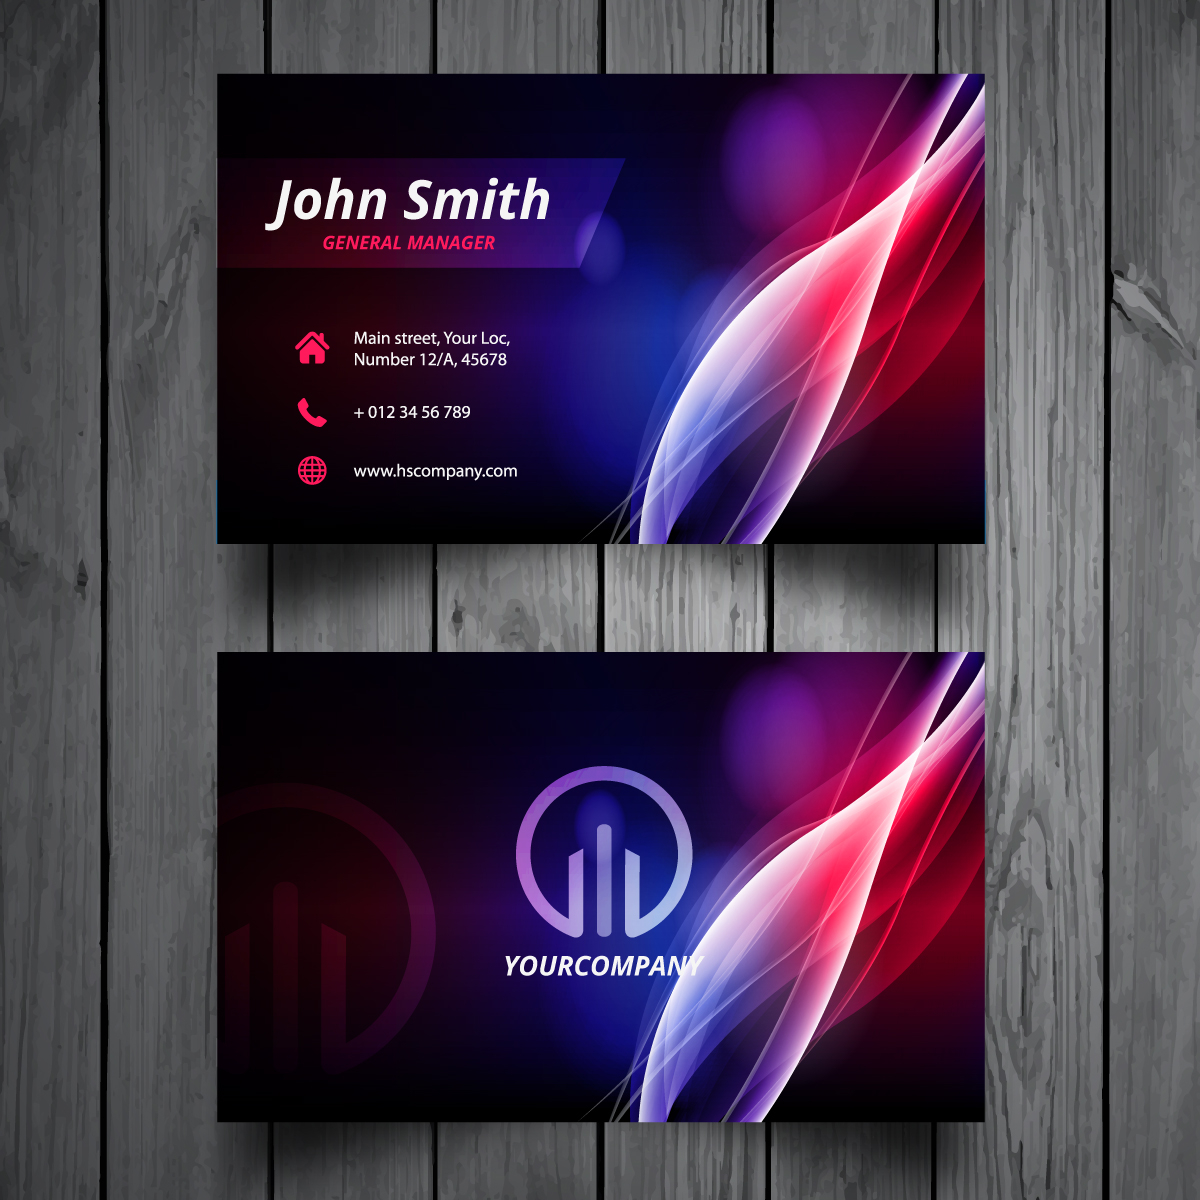 Colorful-wavy-business-card-design